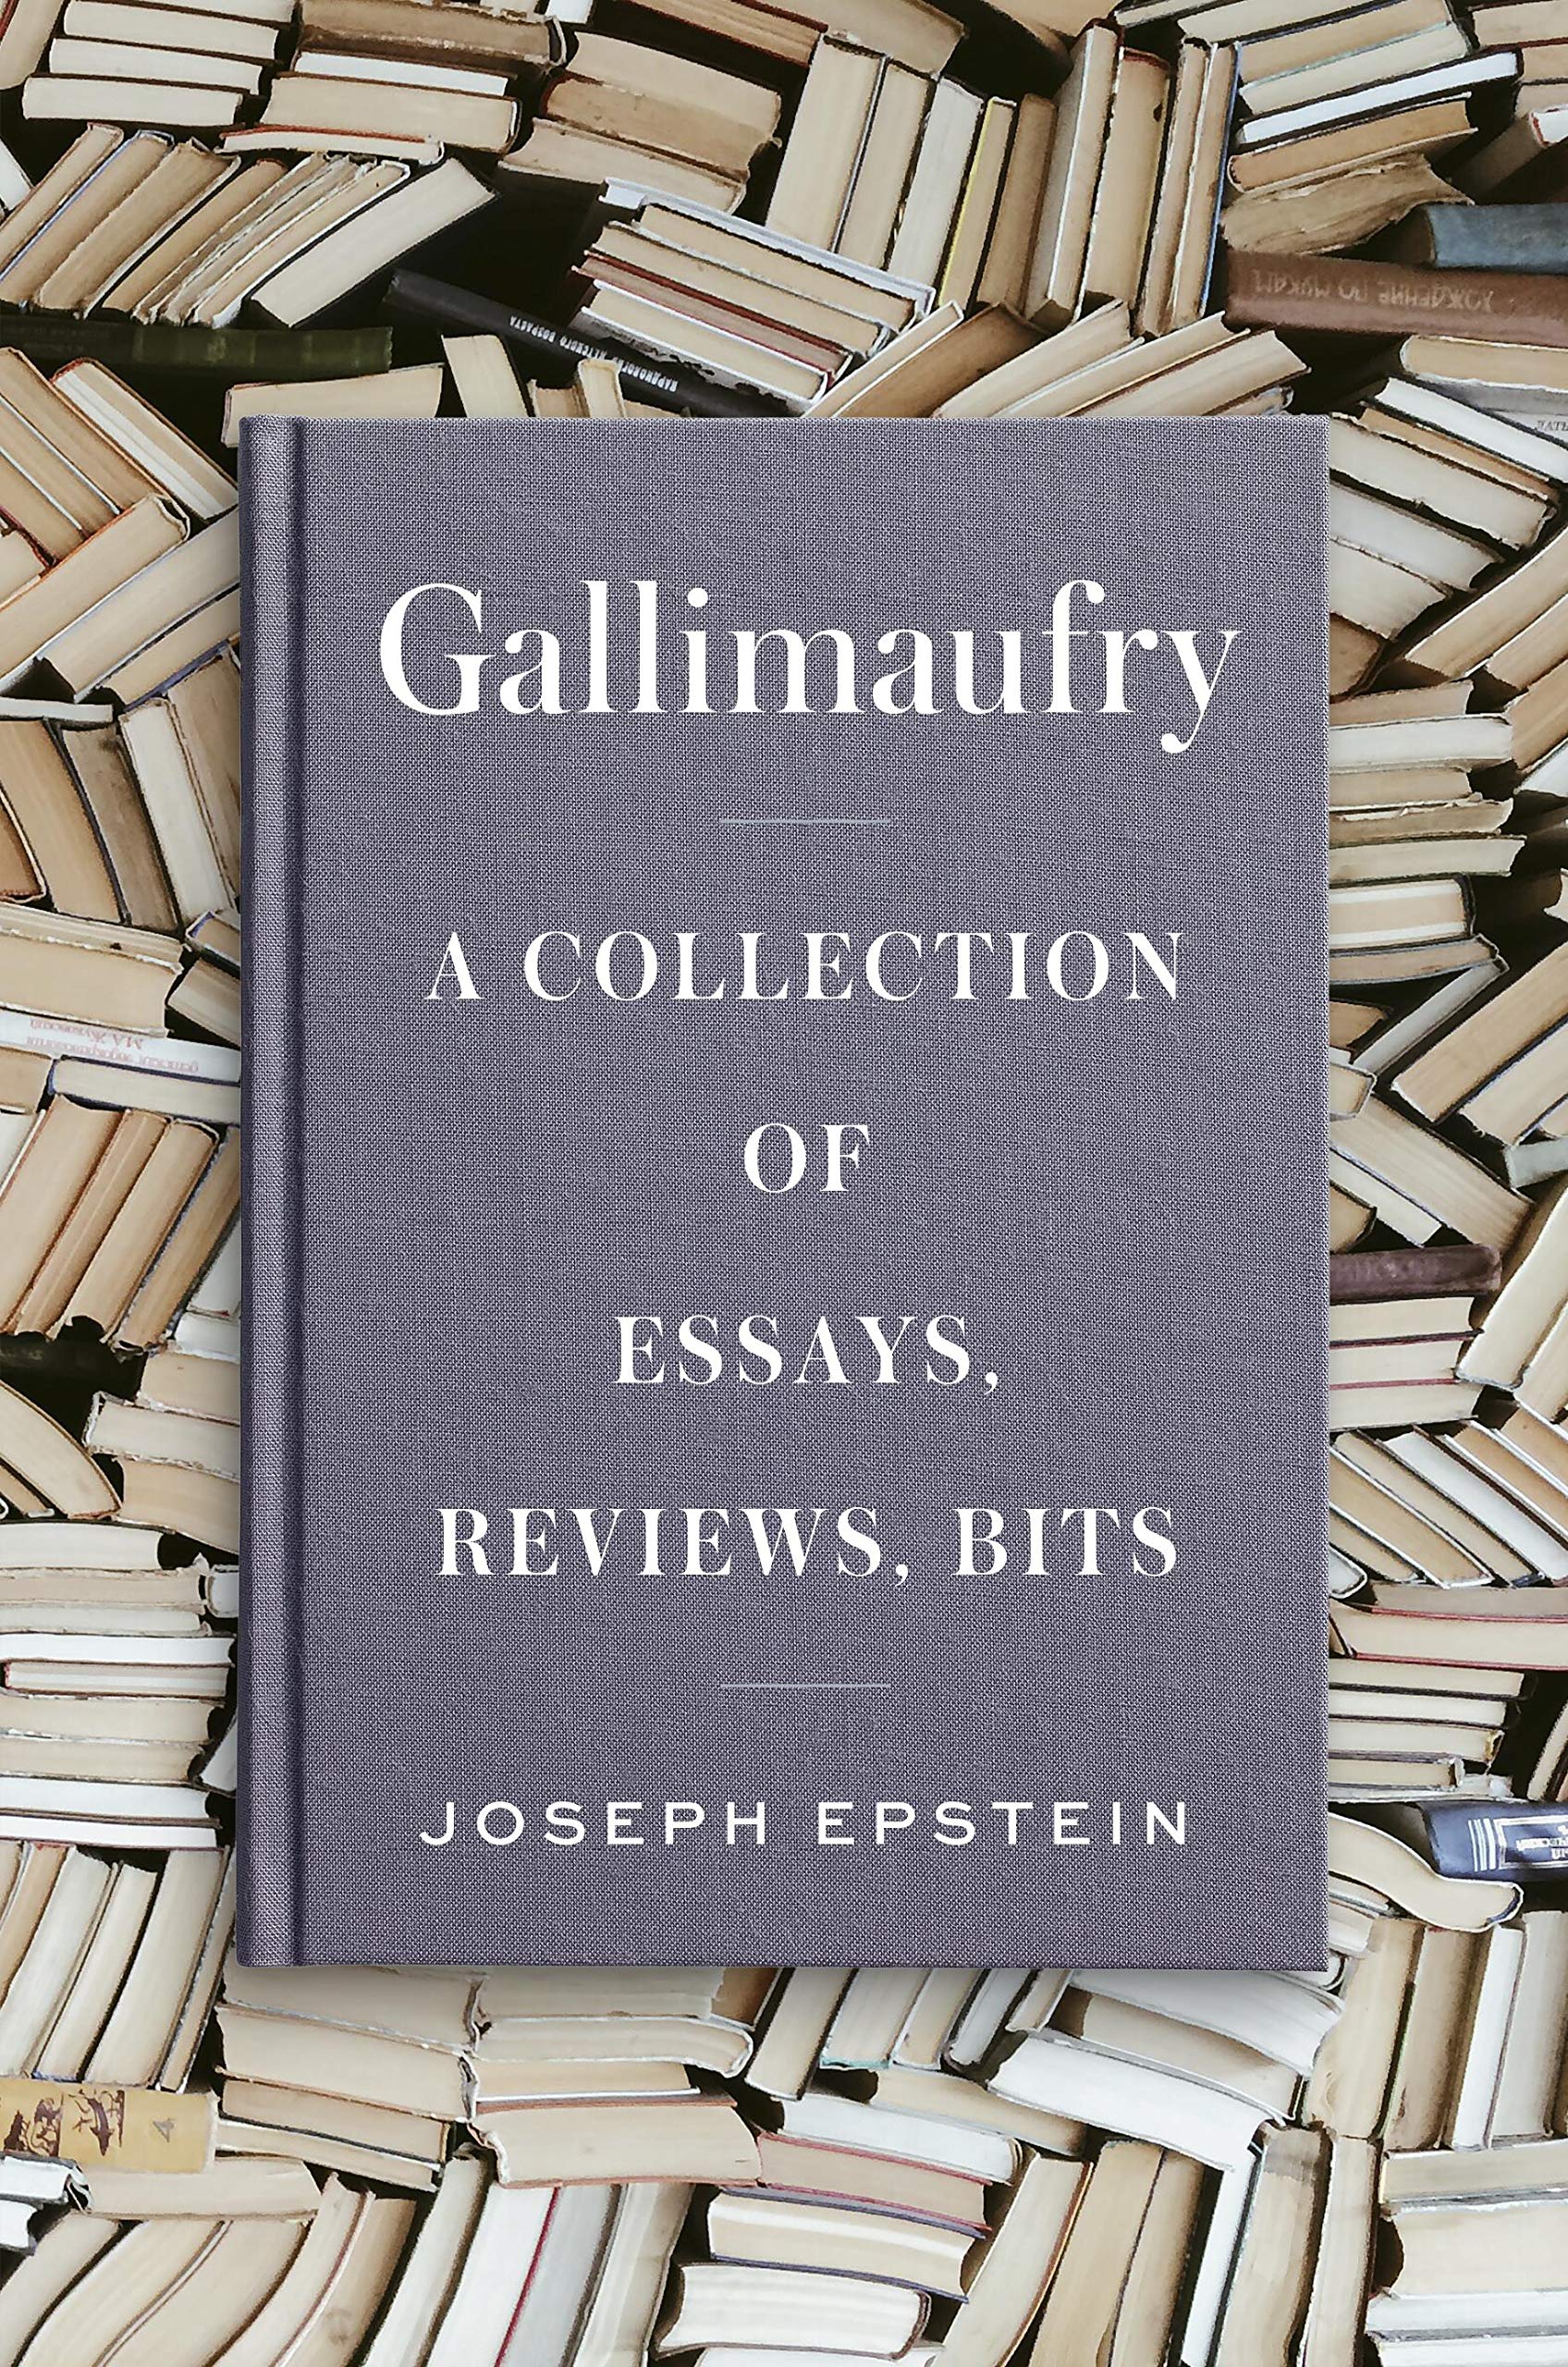 Gallimaufry: A Collection of Essays, Reviews, Bits